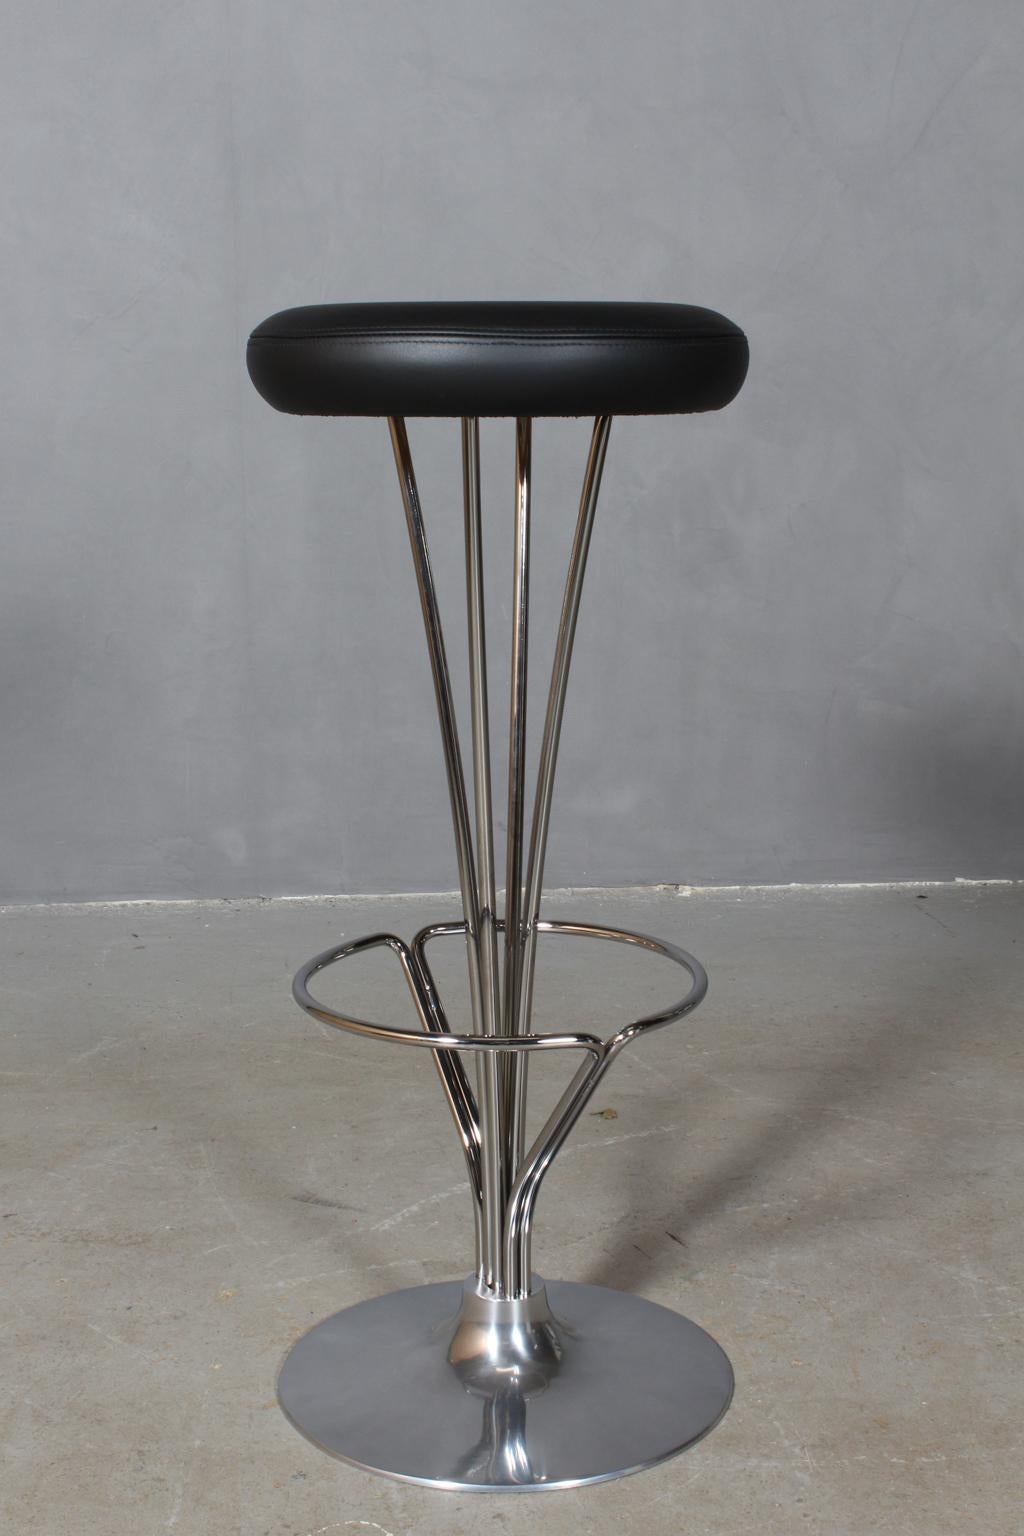 Piet Hein bar stools original upholstered with black leather.

Piet Hein base.

Made by Piet Hein, brand new in box.